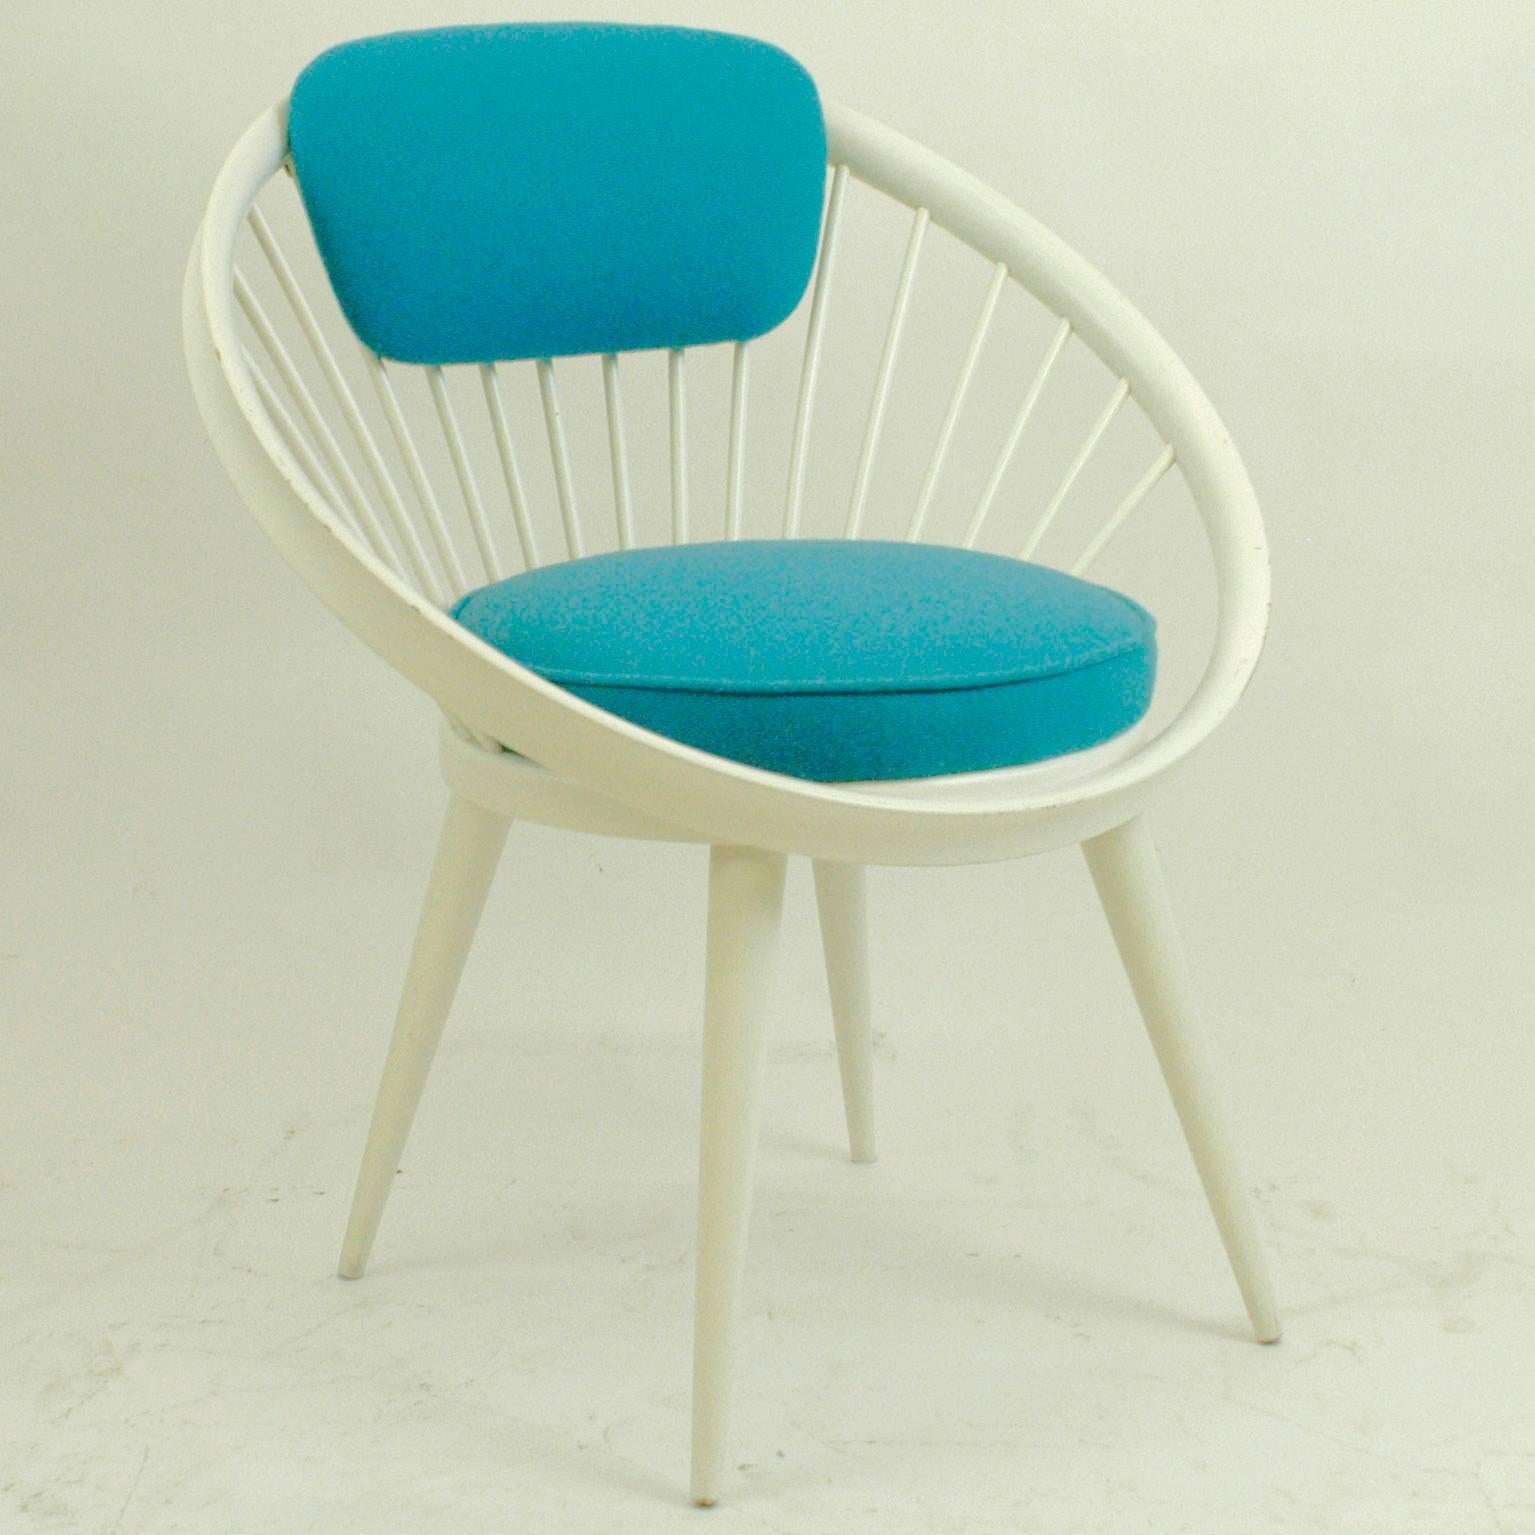 Charming white laquered Scandinavian lounge chair designed by Yngve Ekström. It features a spindled circular form with tapered legs and with top quality fabric from Kvadrat new upholstered blue turquoise cushions. Overall very good condition with